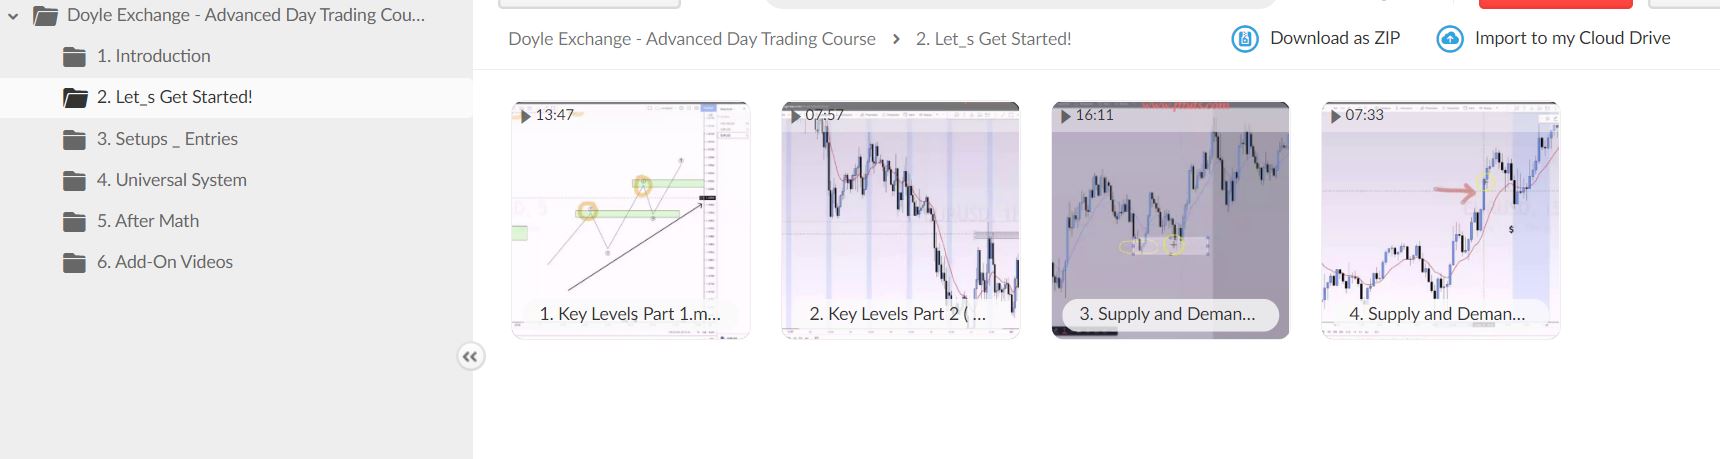 doyle-exchange-advanced-day-trading-course1